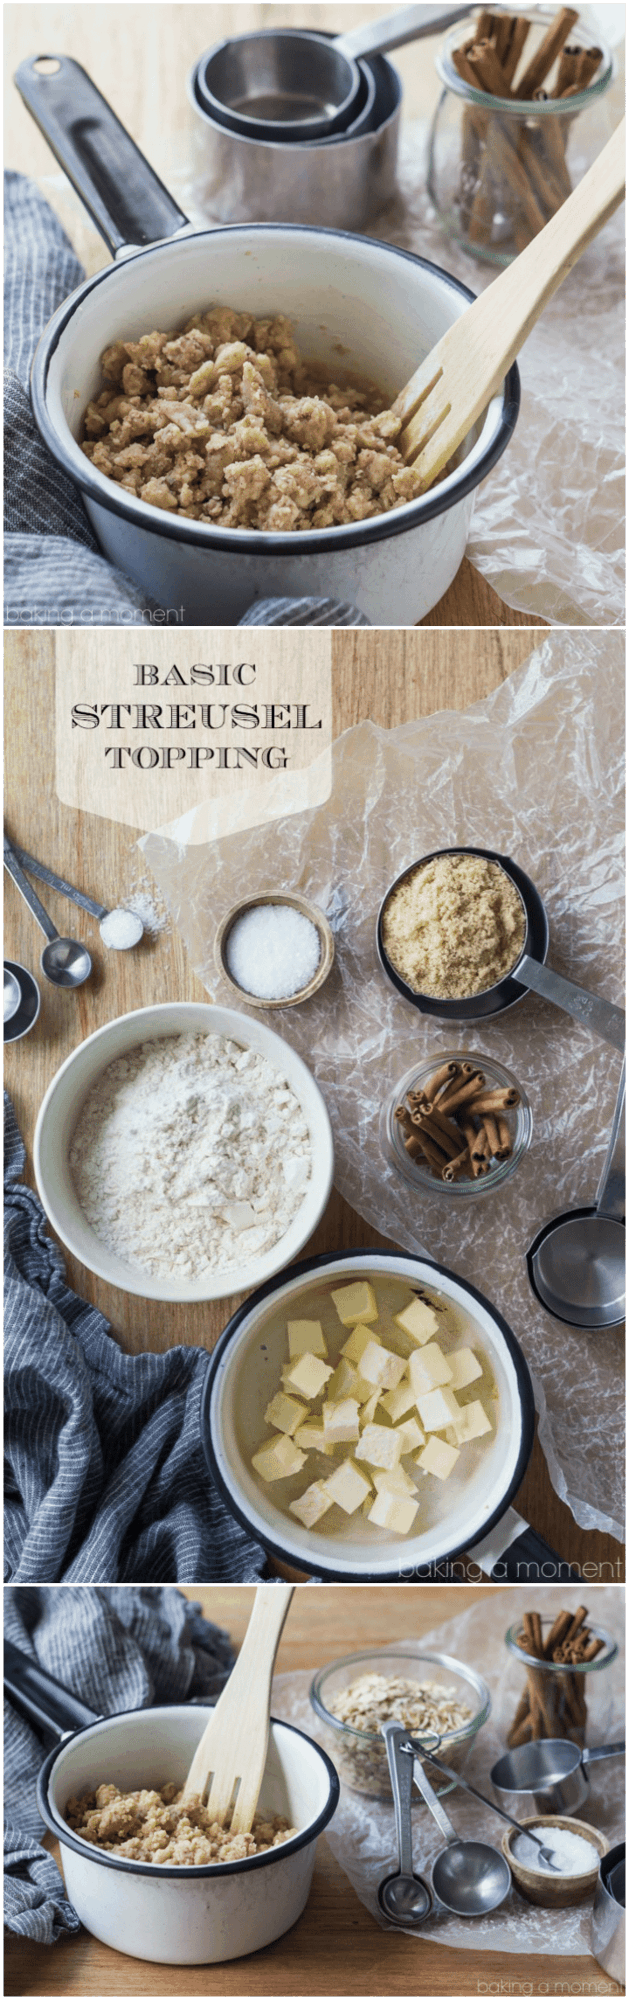 I find myself using this basic streusel recipe ALL THE TIME!  It's so good on breads, muffins, and fruit crisps, and you can customize the recipe in so many different ways.  